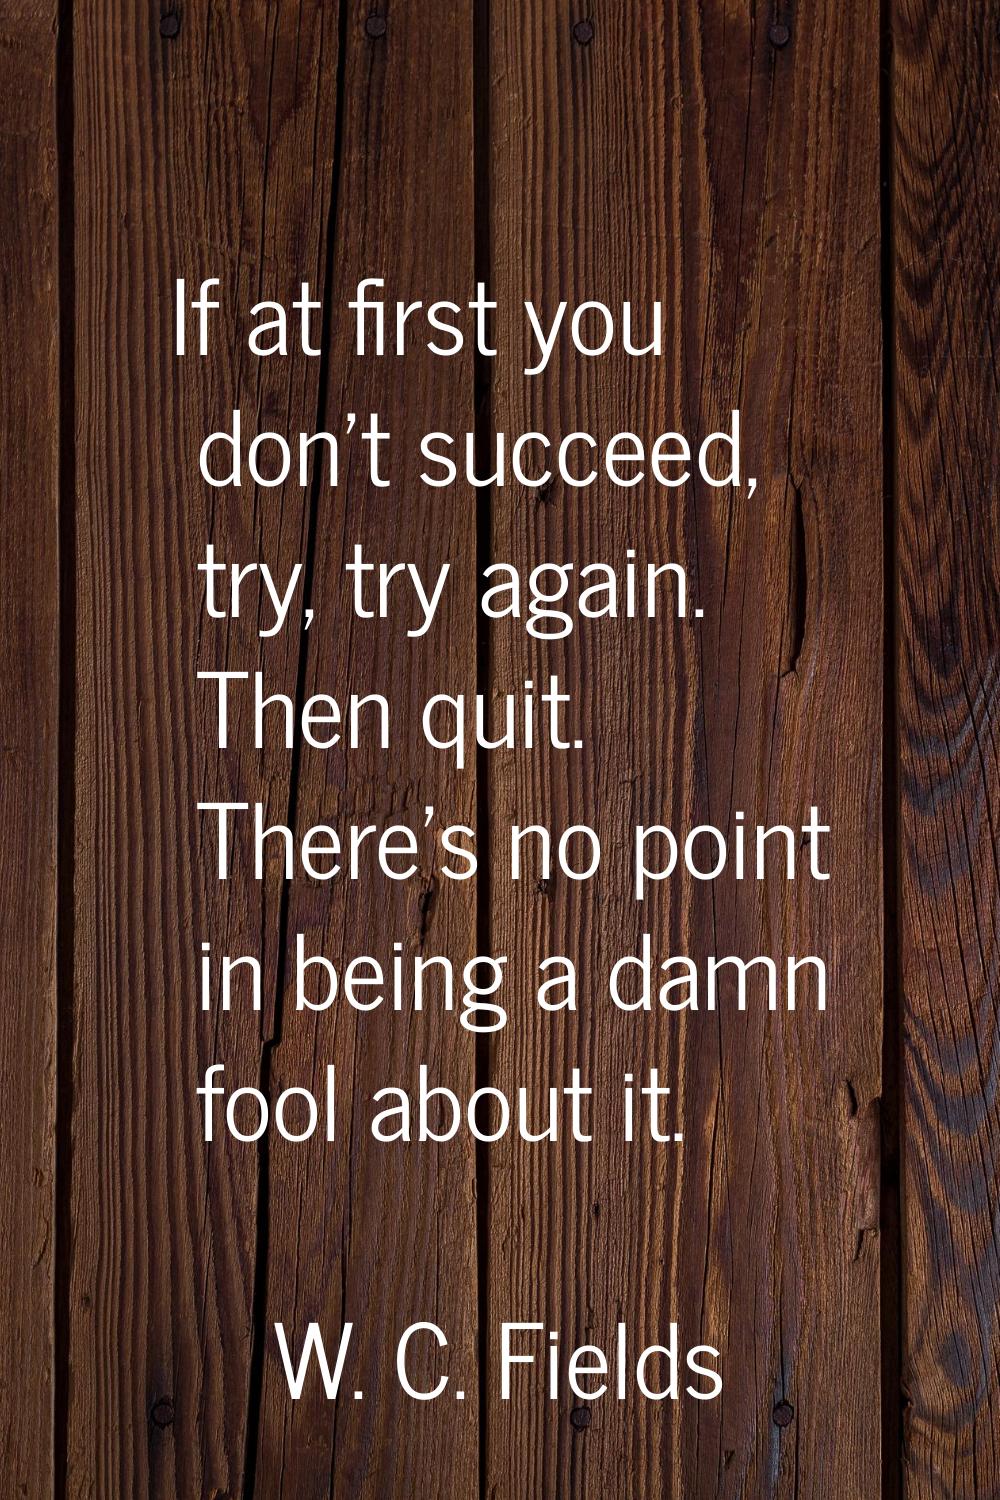 If at first you don't succeed, try, try again. Then quit. There's no point in being a damn fool abo